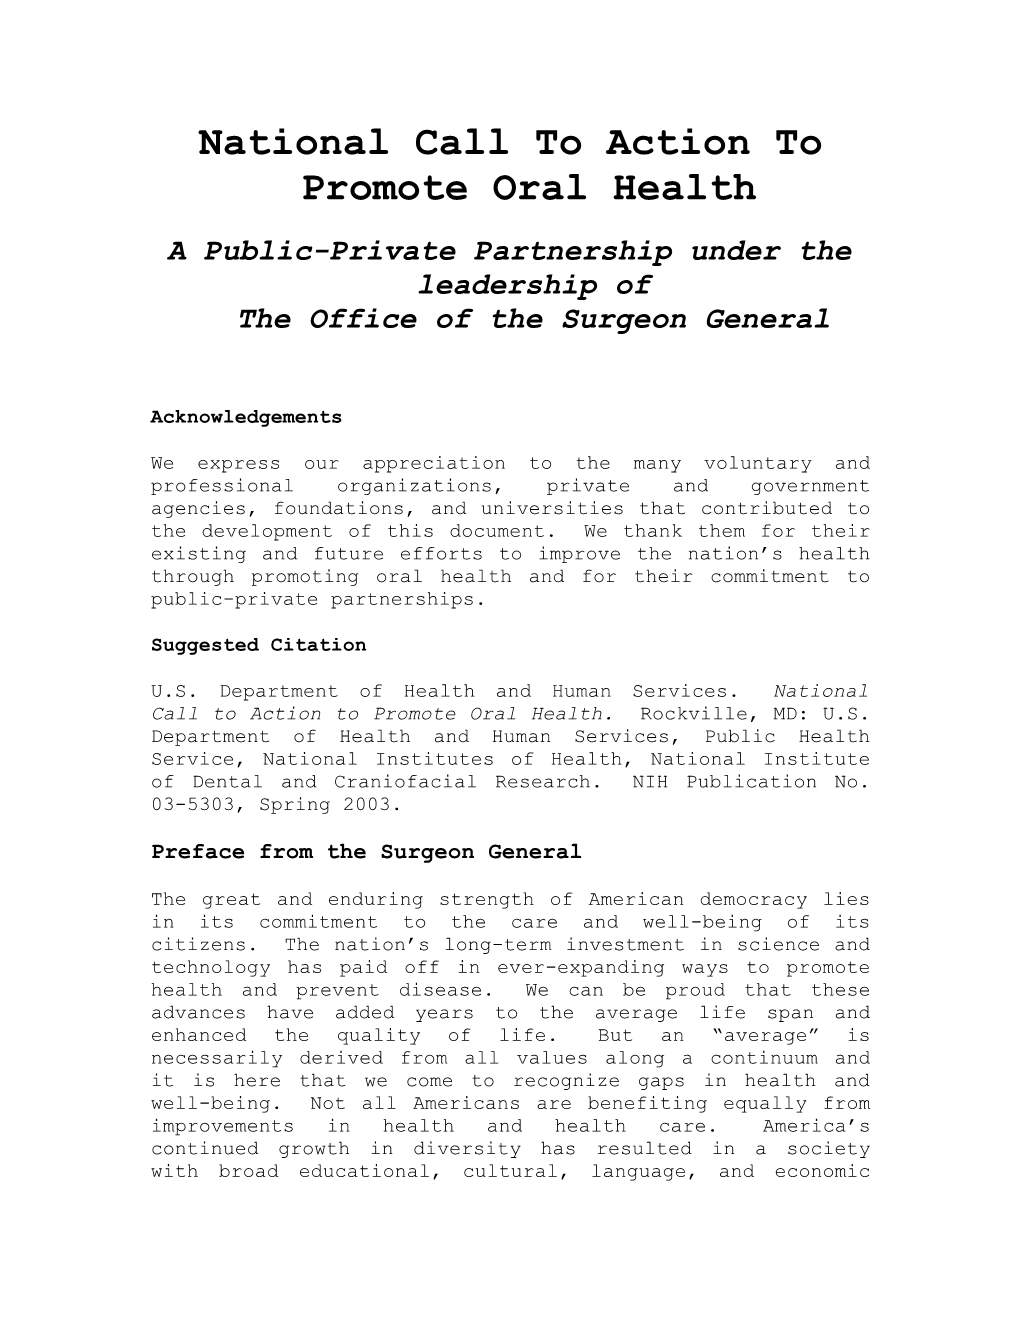 National Call to Action to Promote Oral Health